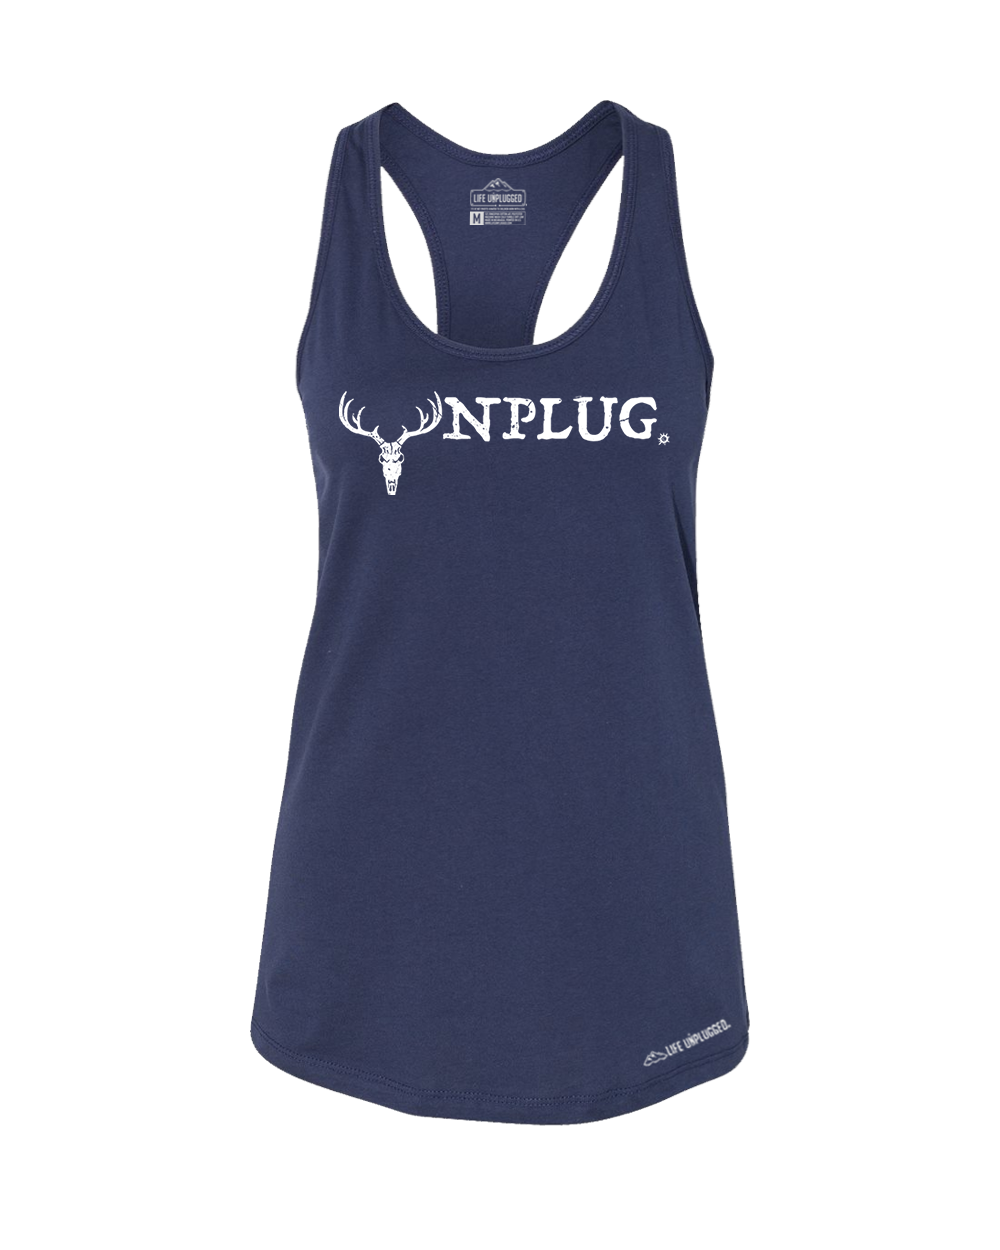 Hunting Premium Women's Relaxed Fit Racerback Tank Top - Life Unplugged